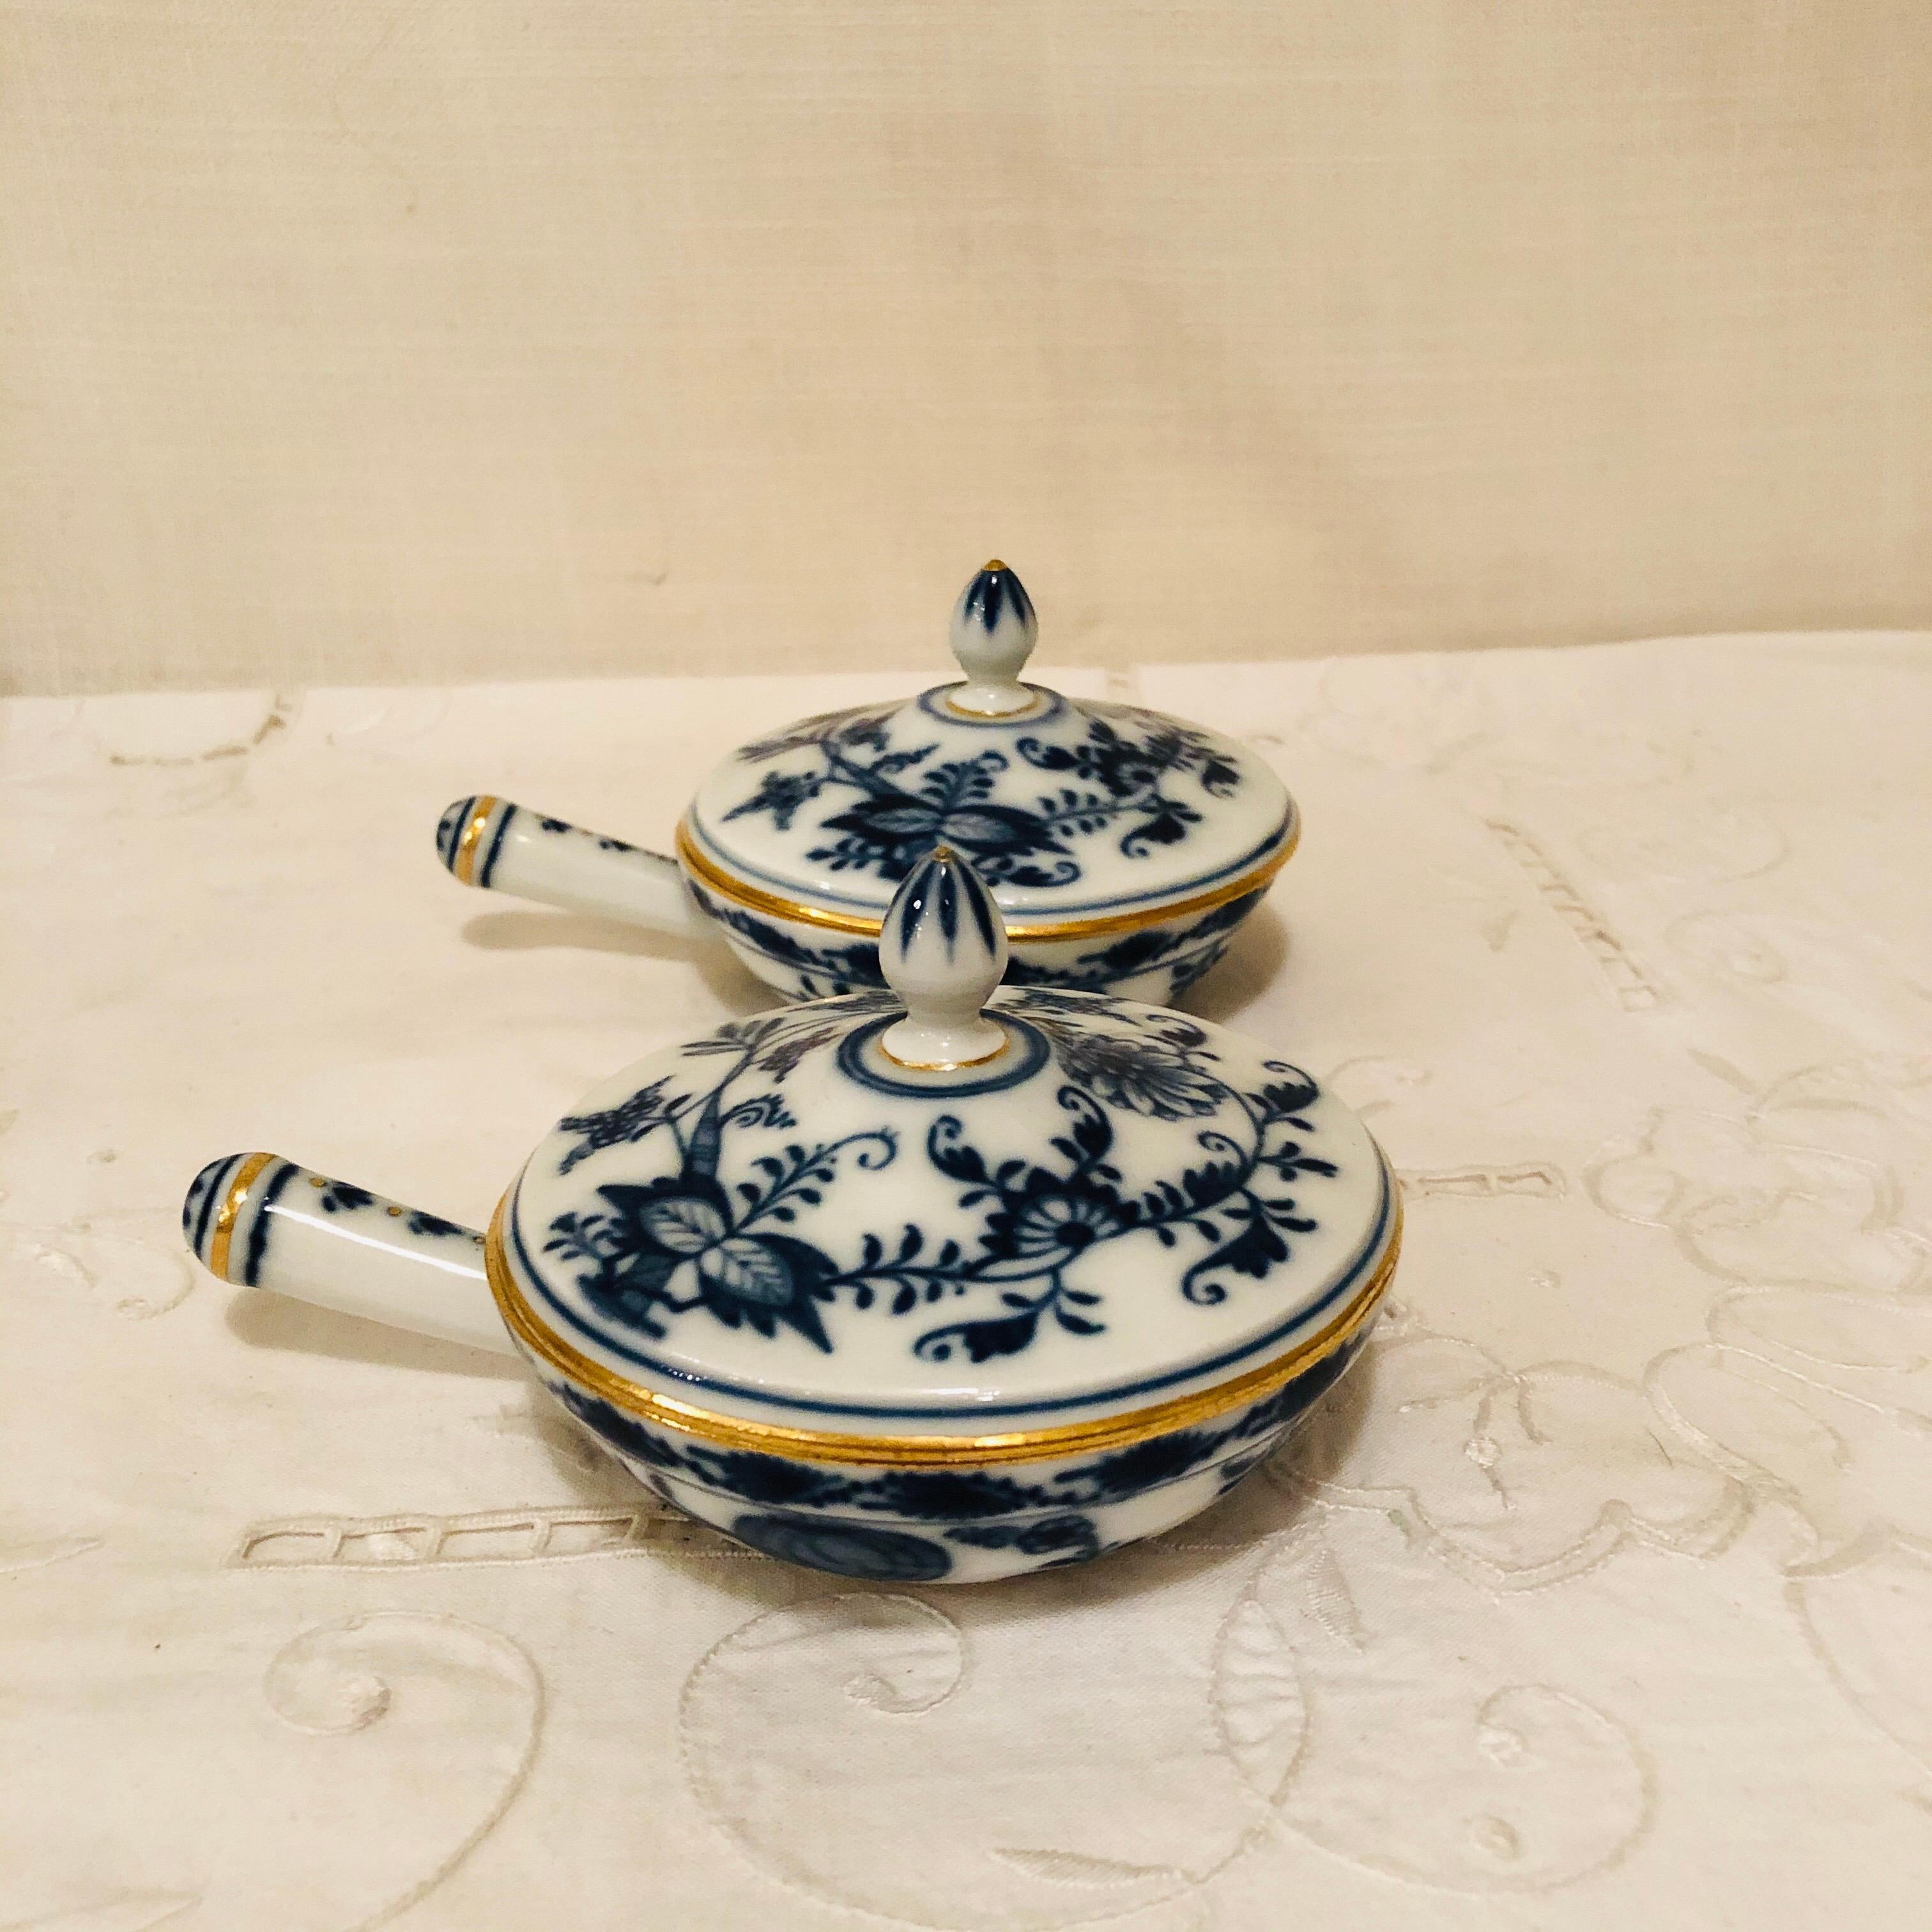 We are proud to offer you this set of ten very rare Meissen blue onion pots de crème complete with handles and covers and gold rims and accents. They were made before 1890, and they are first quality Meissen. Think about the delicious desserts you